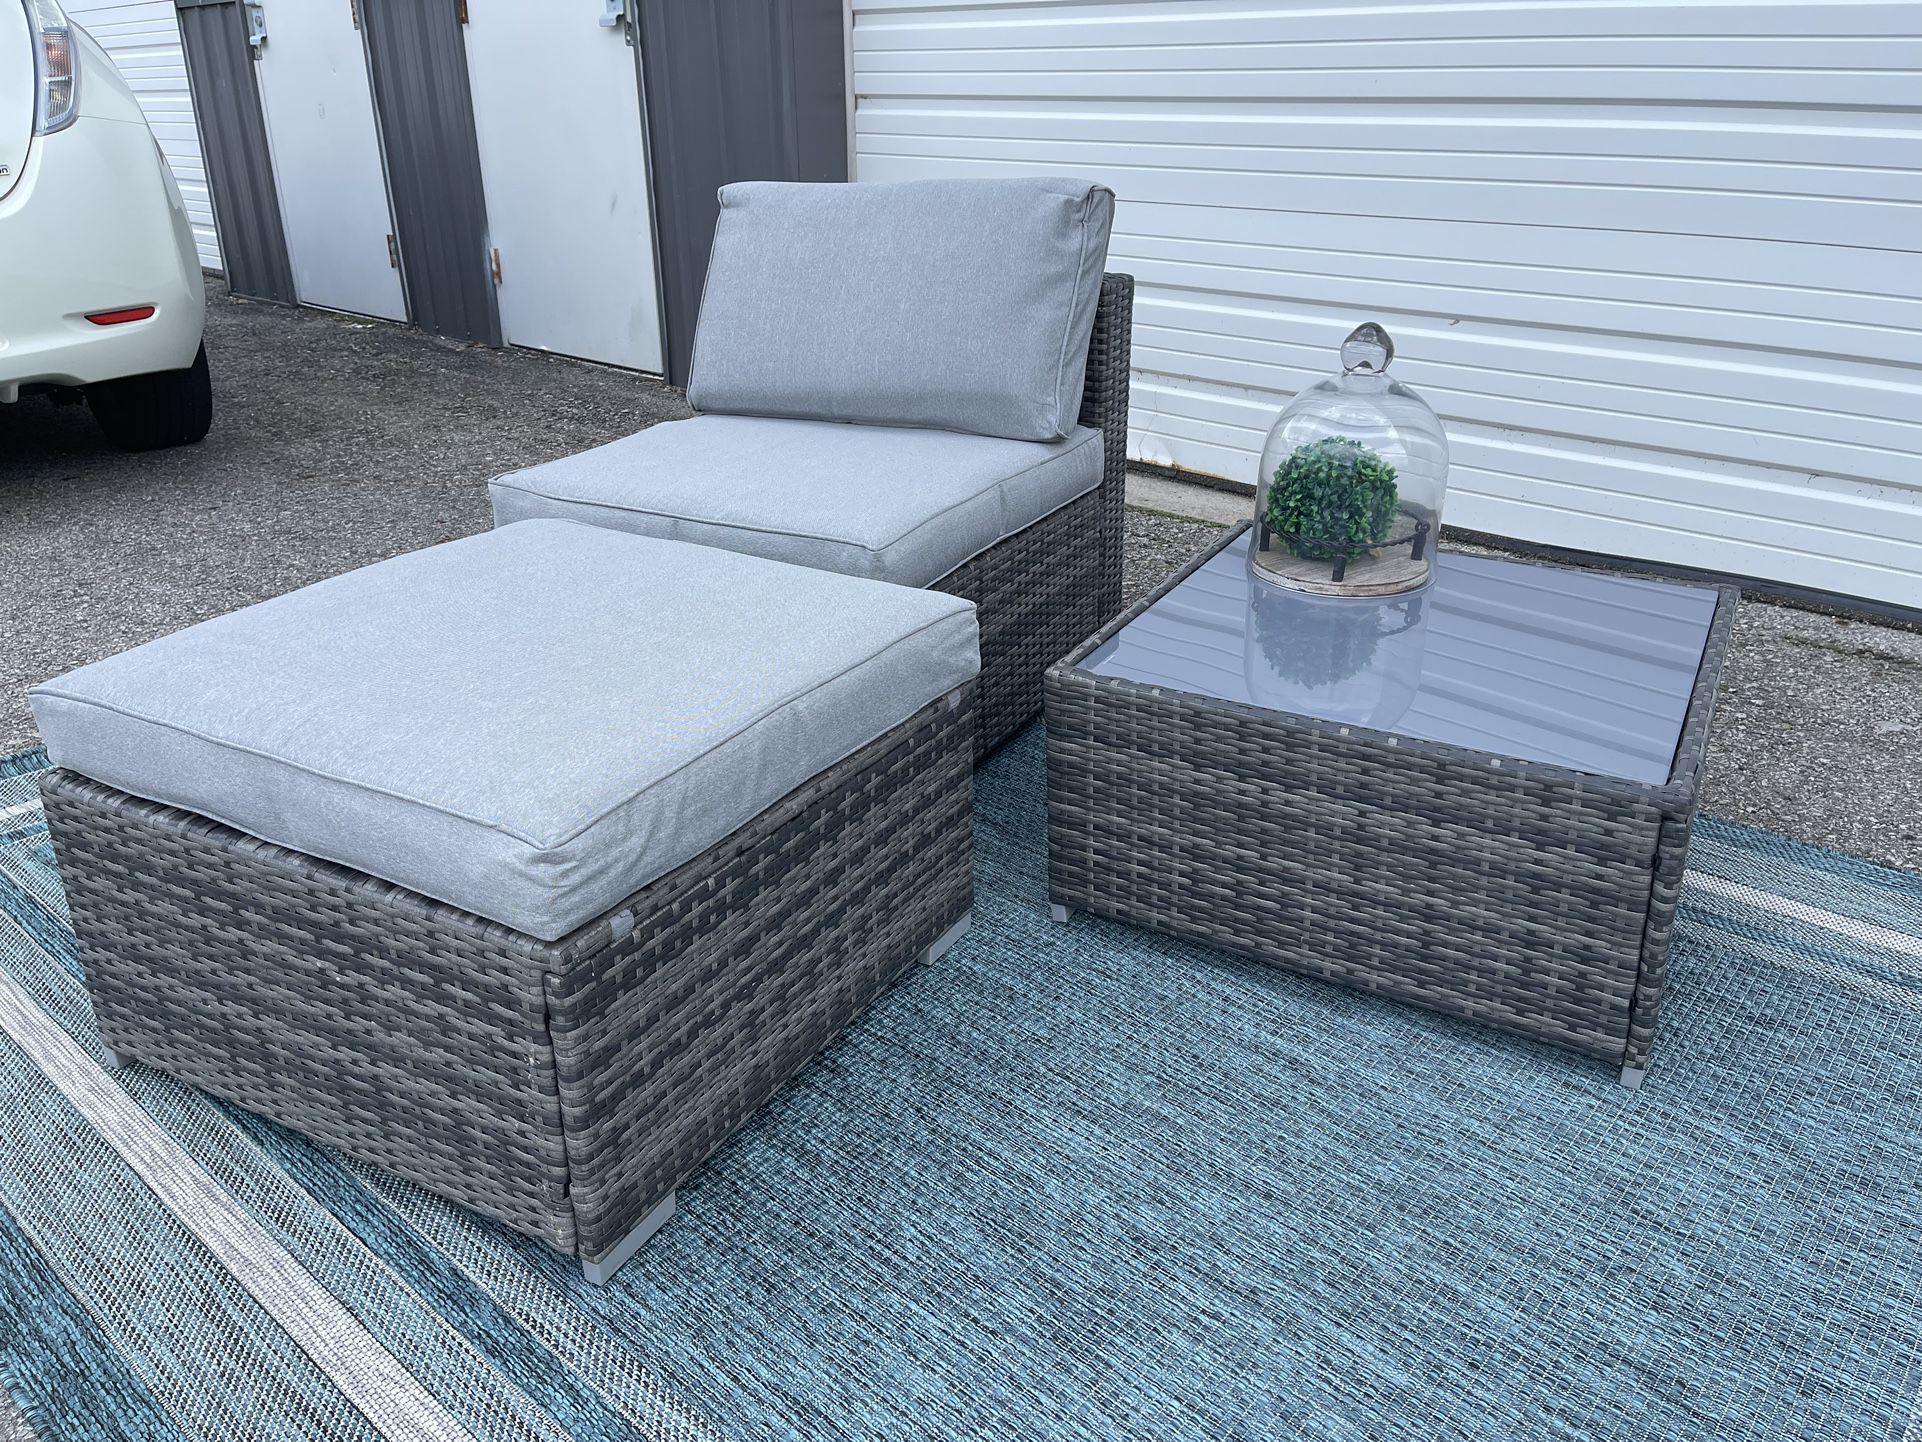 New Outdoor Patio Furniture Chair, Ottoman And Coffee Table